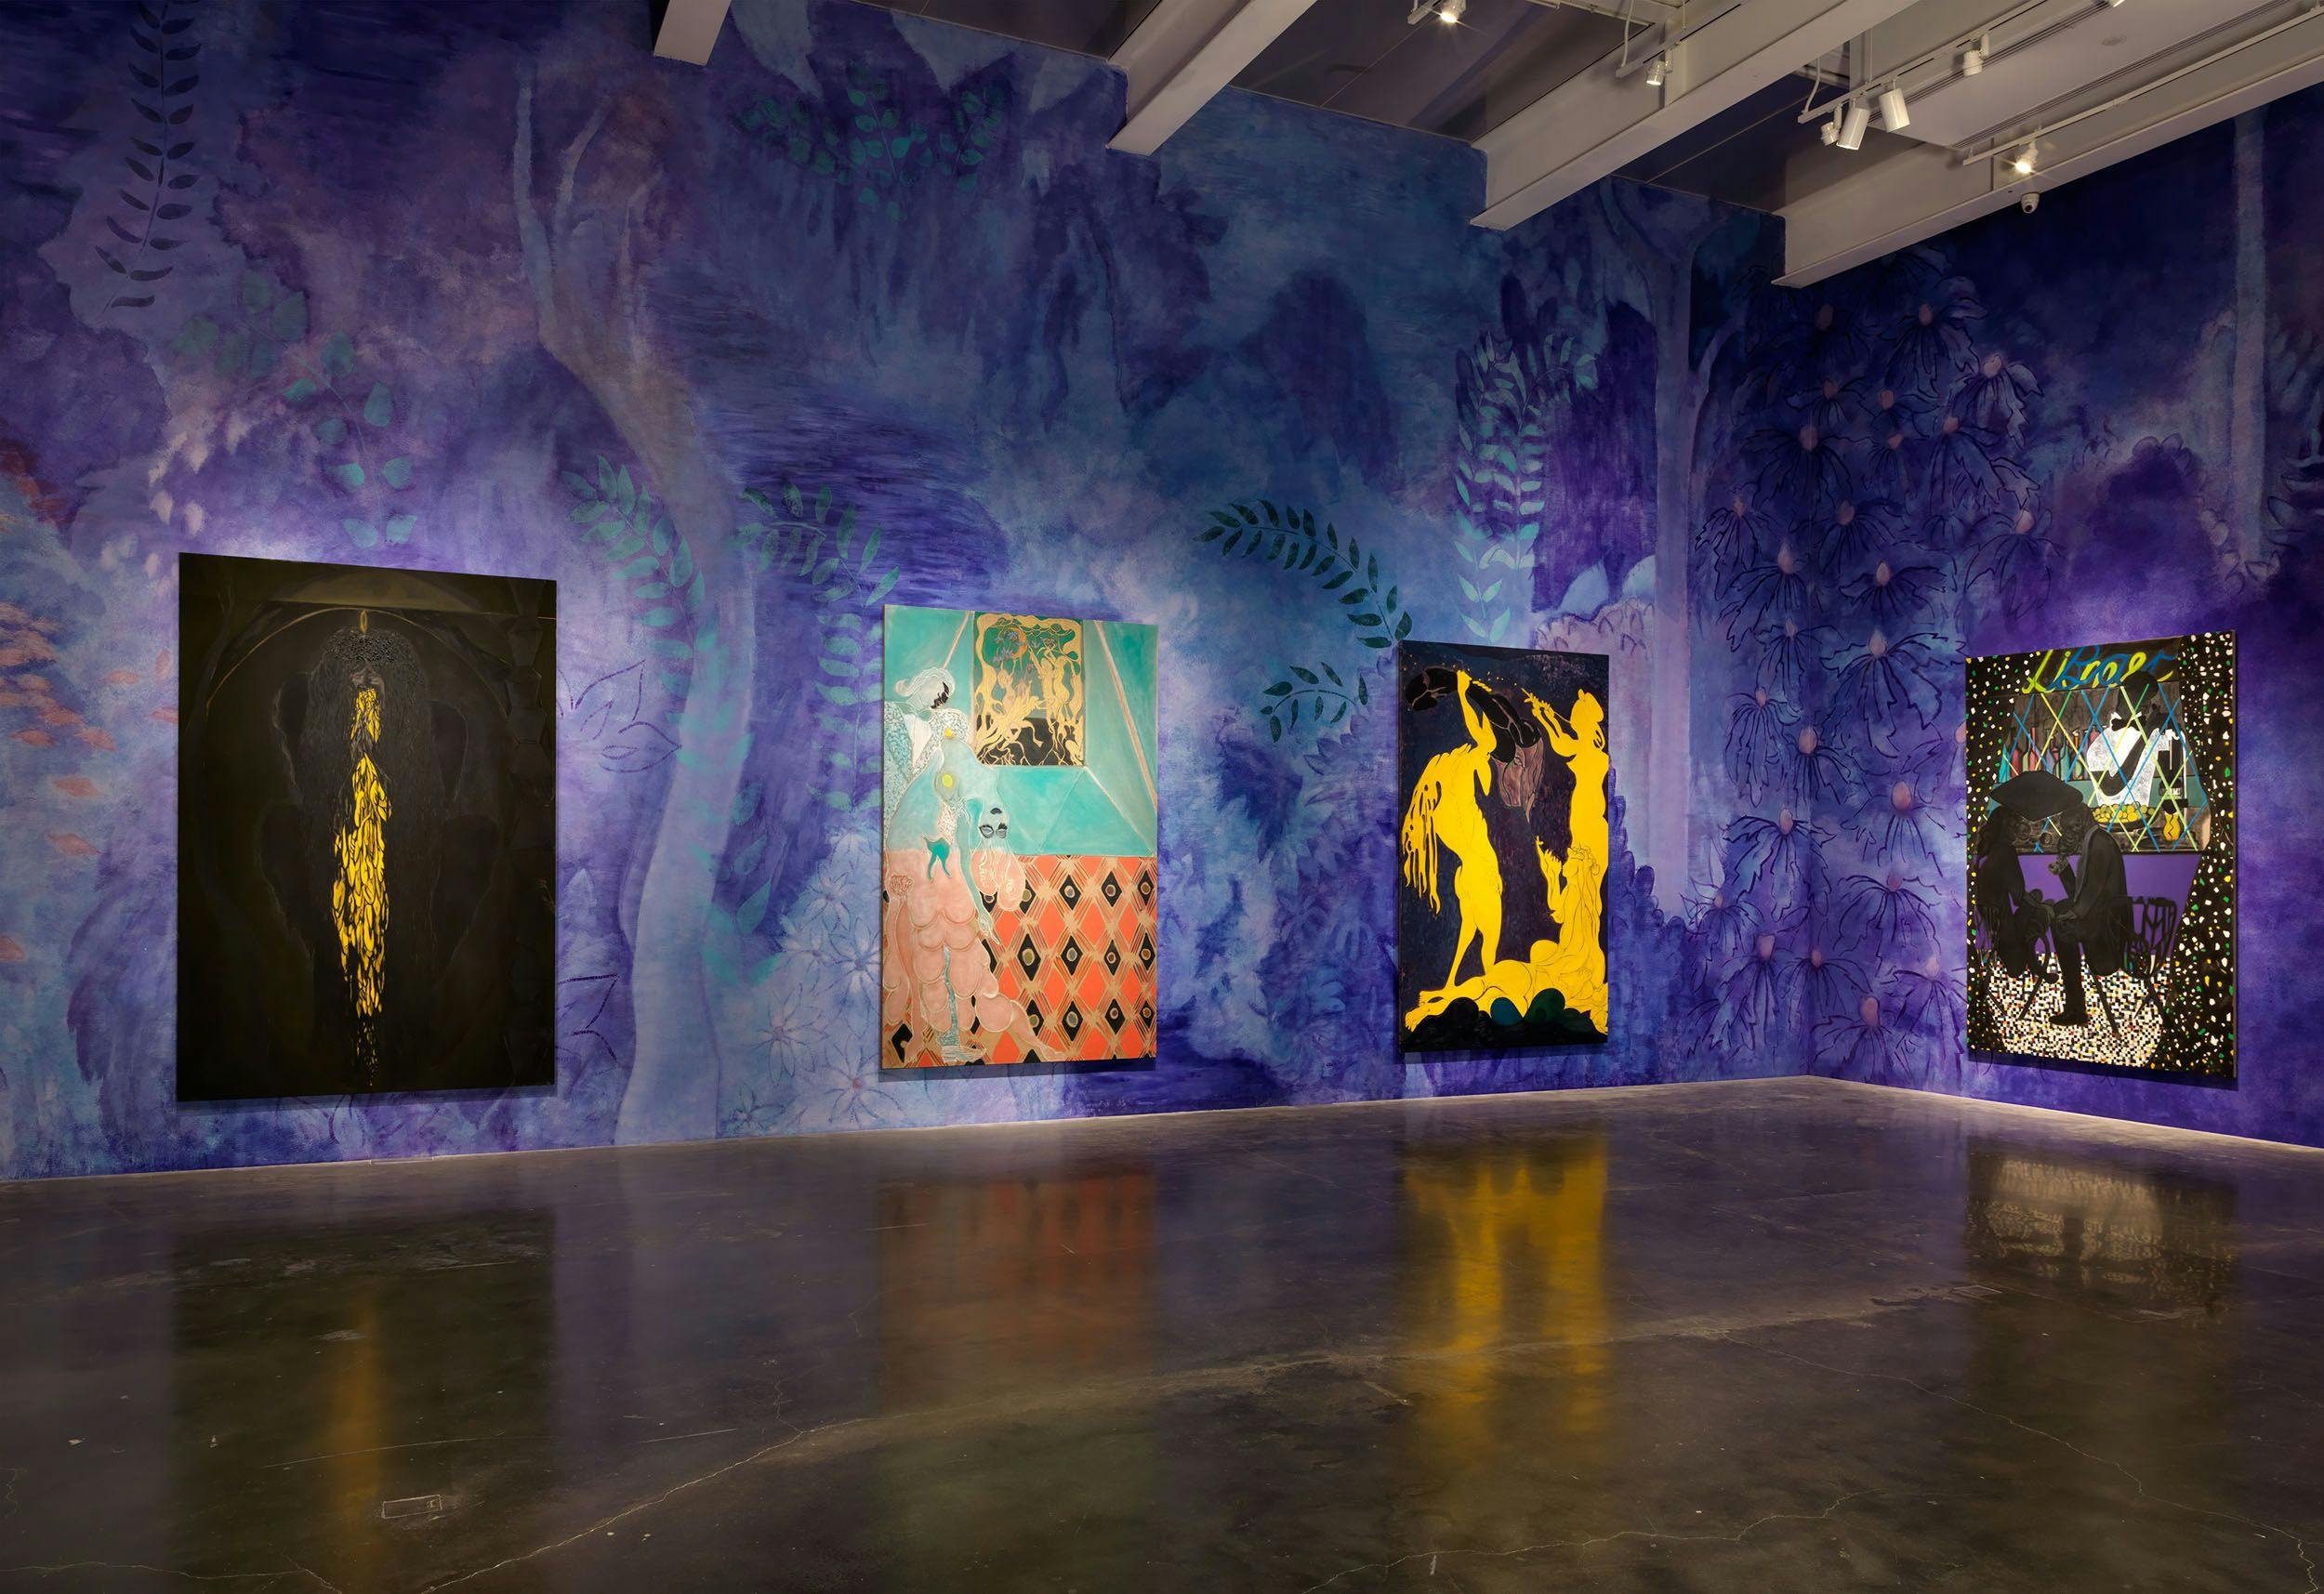 Installation view of the exhibition, Chris Ofili: Night and Day, at the New Museum in New York, dated 2014.